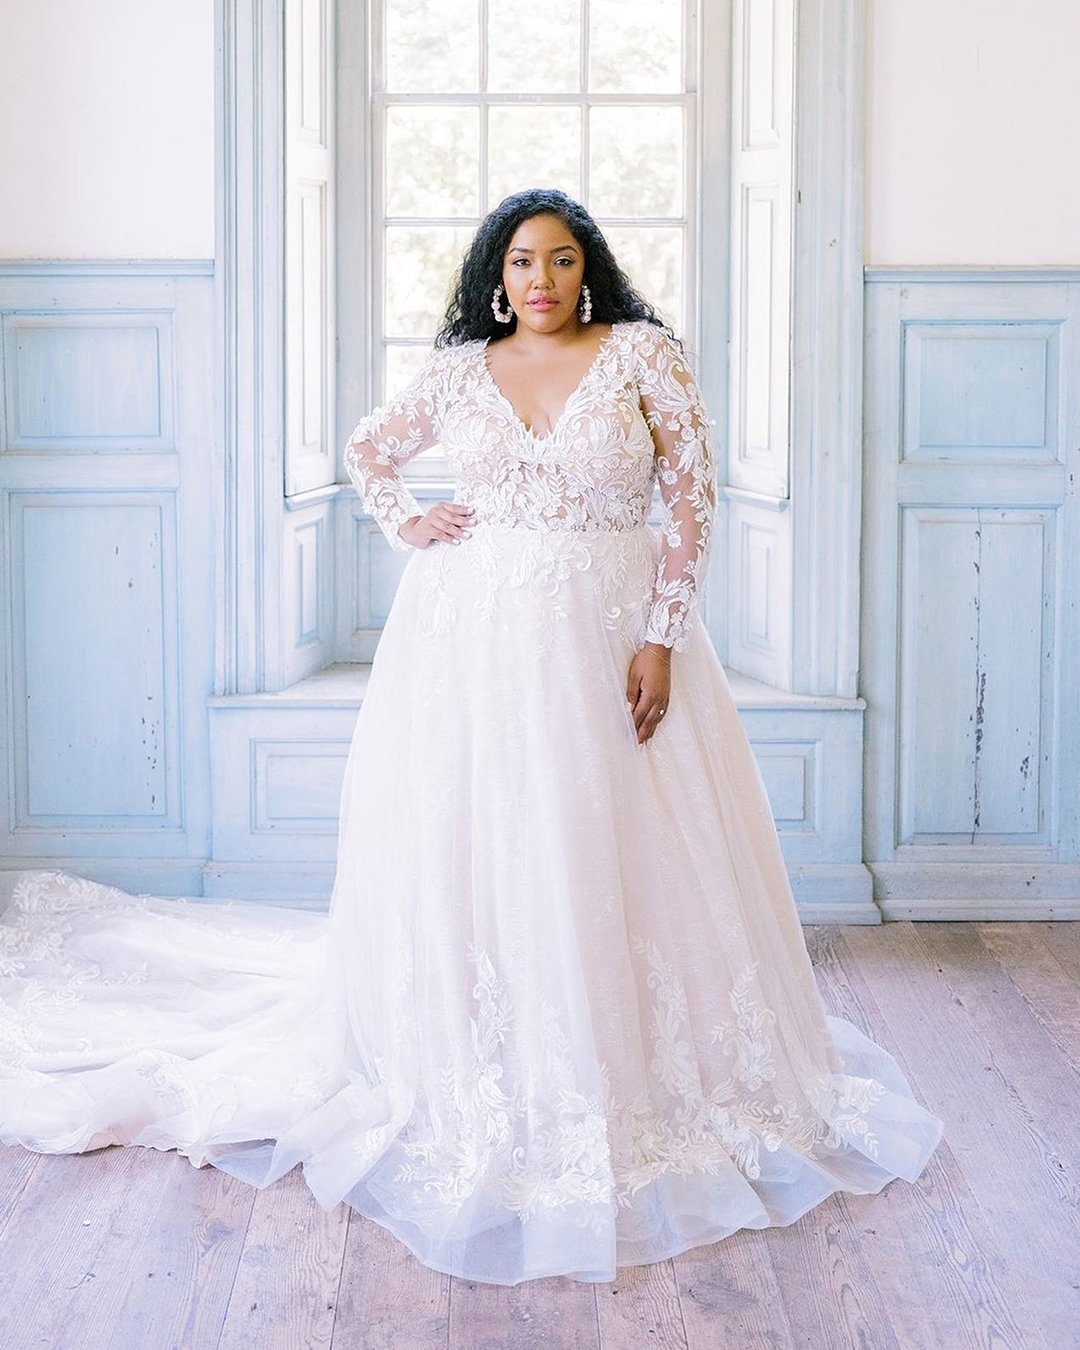 plus size wedding dresses with sleeves lace v neckline romantic maggiesottero